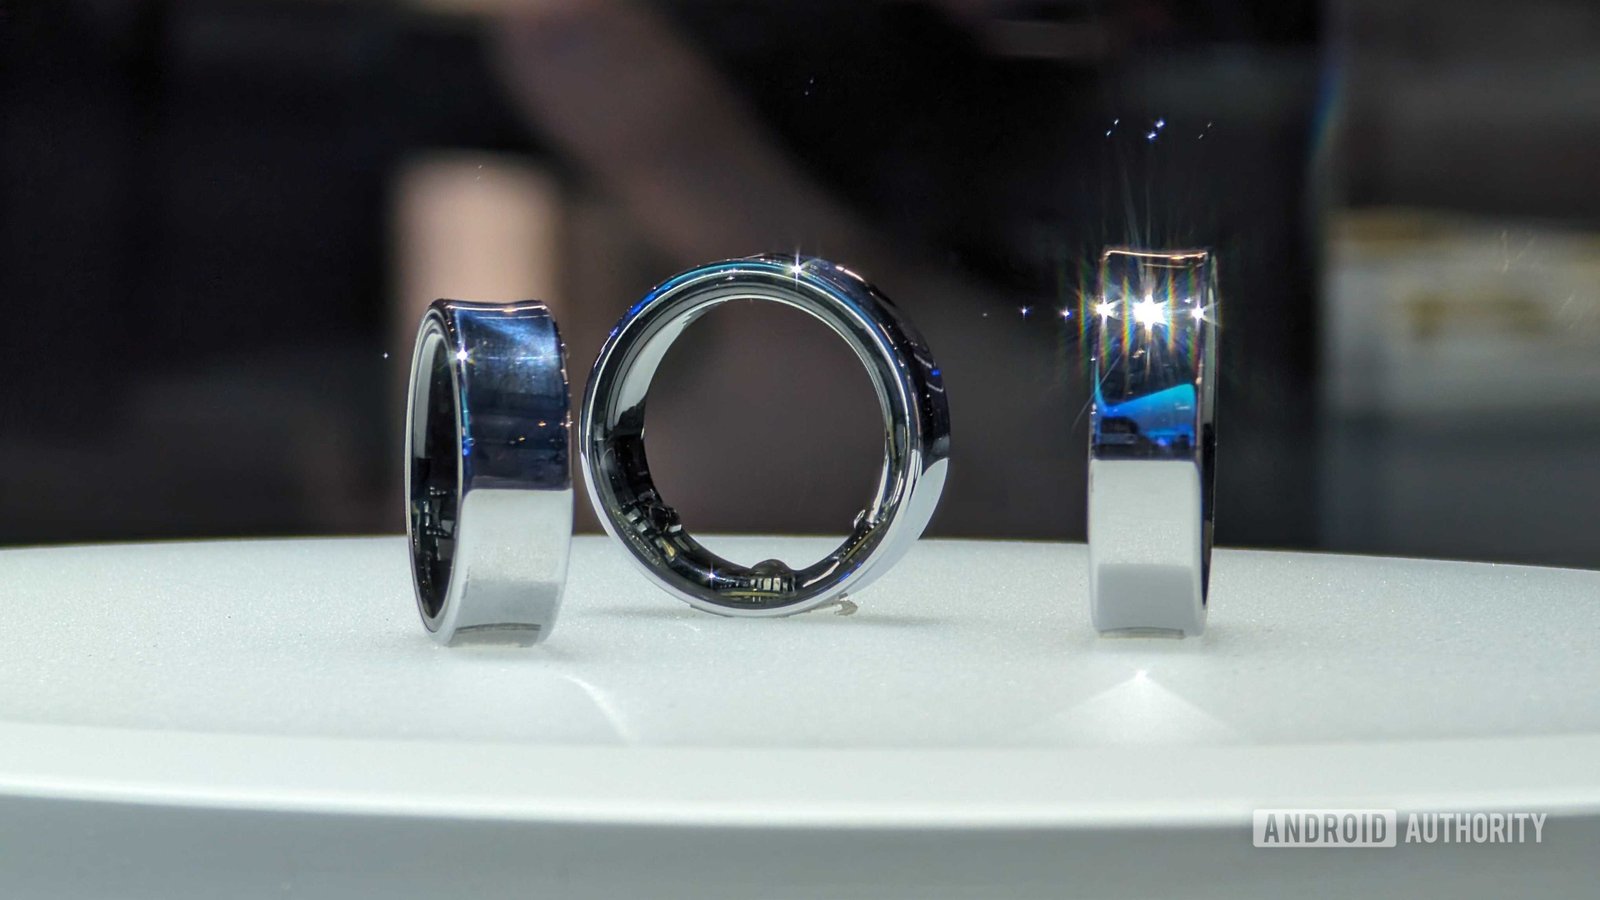 Samsung aims to make Galaxy Ring compatible on other Android phones